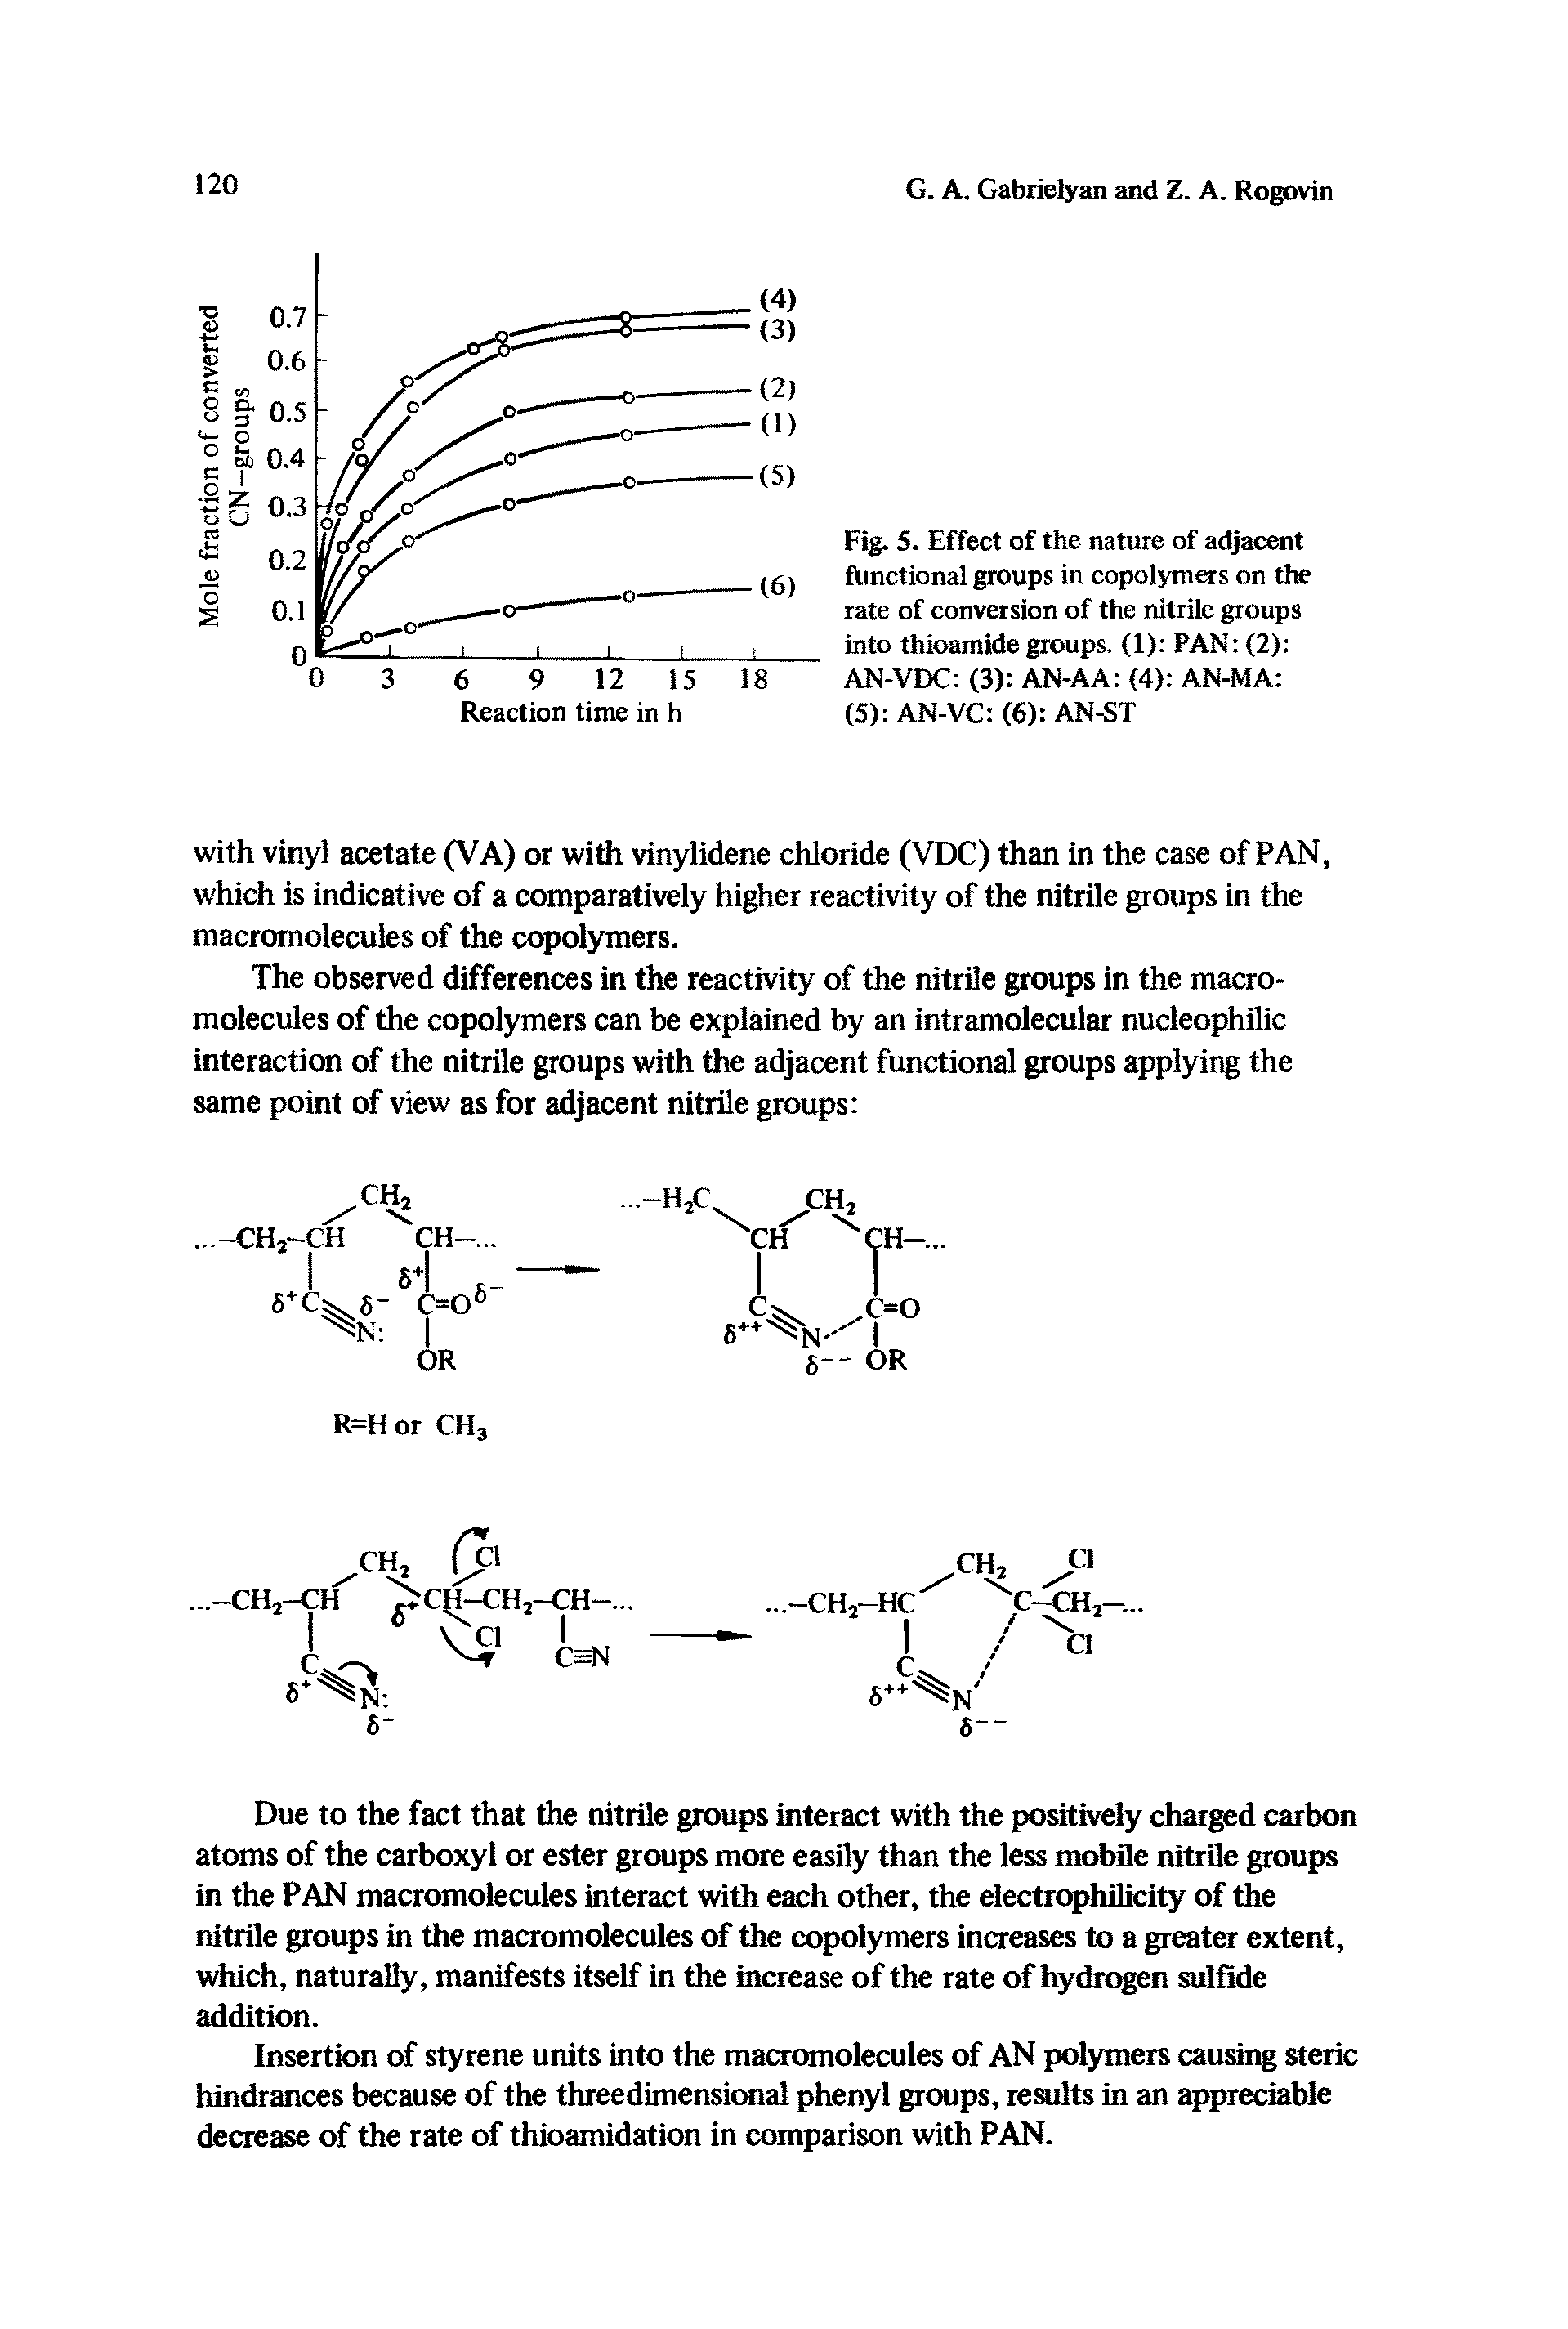 Fig. 5. Effect of the nature of adjacent functional groups in copolymers on the rate of conversion of the nitrile groups into thioamide groups. (1) PAN (2) AN-VDC (3) AN-AA (4) AN-MA (5) AN-VC (6) AN-ST...